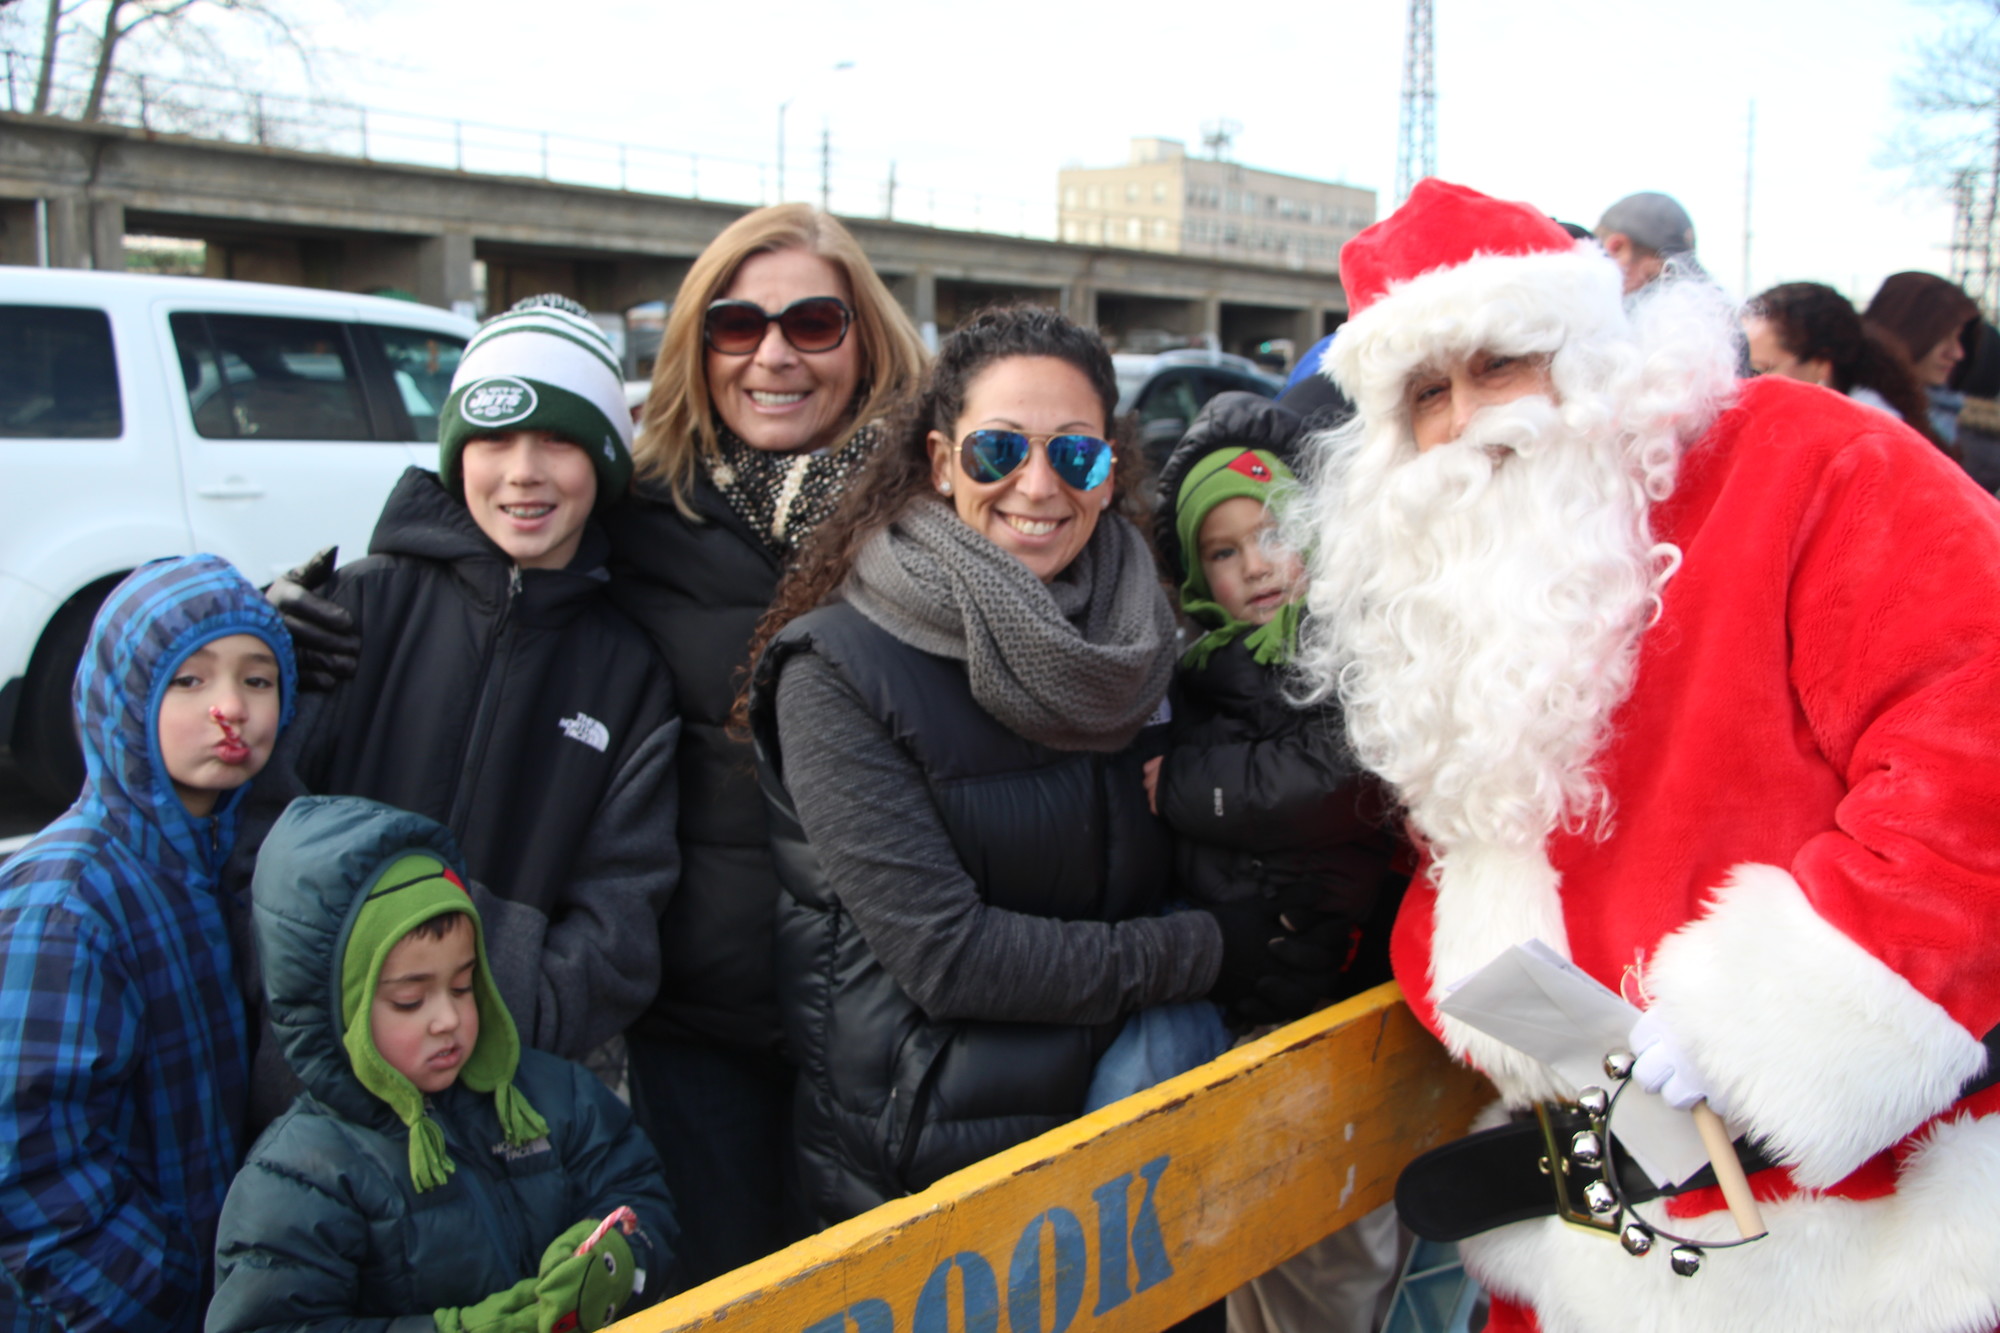 Local families greeted Santa when he arrived early last Saturday morning on a Lynbrook fire truck. Pictured from left were brothers Kaden, Max and Jack Rogers, their grandmother Rhonda Glickman, her daughter Shari Bowes, and Bowes’s son, Ryan.